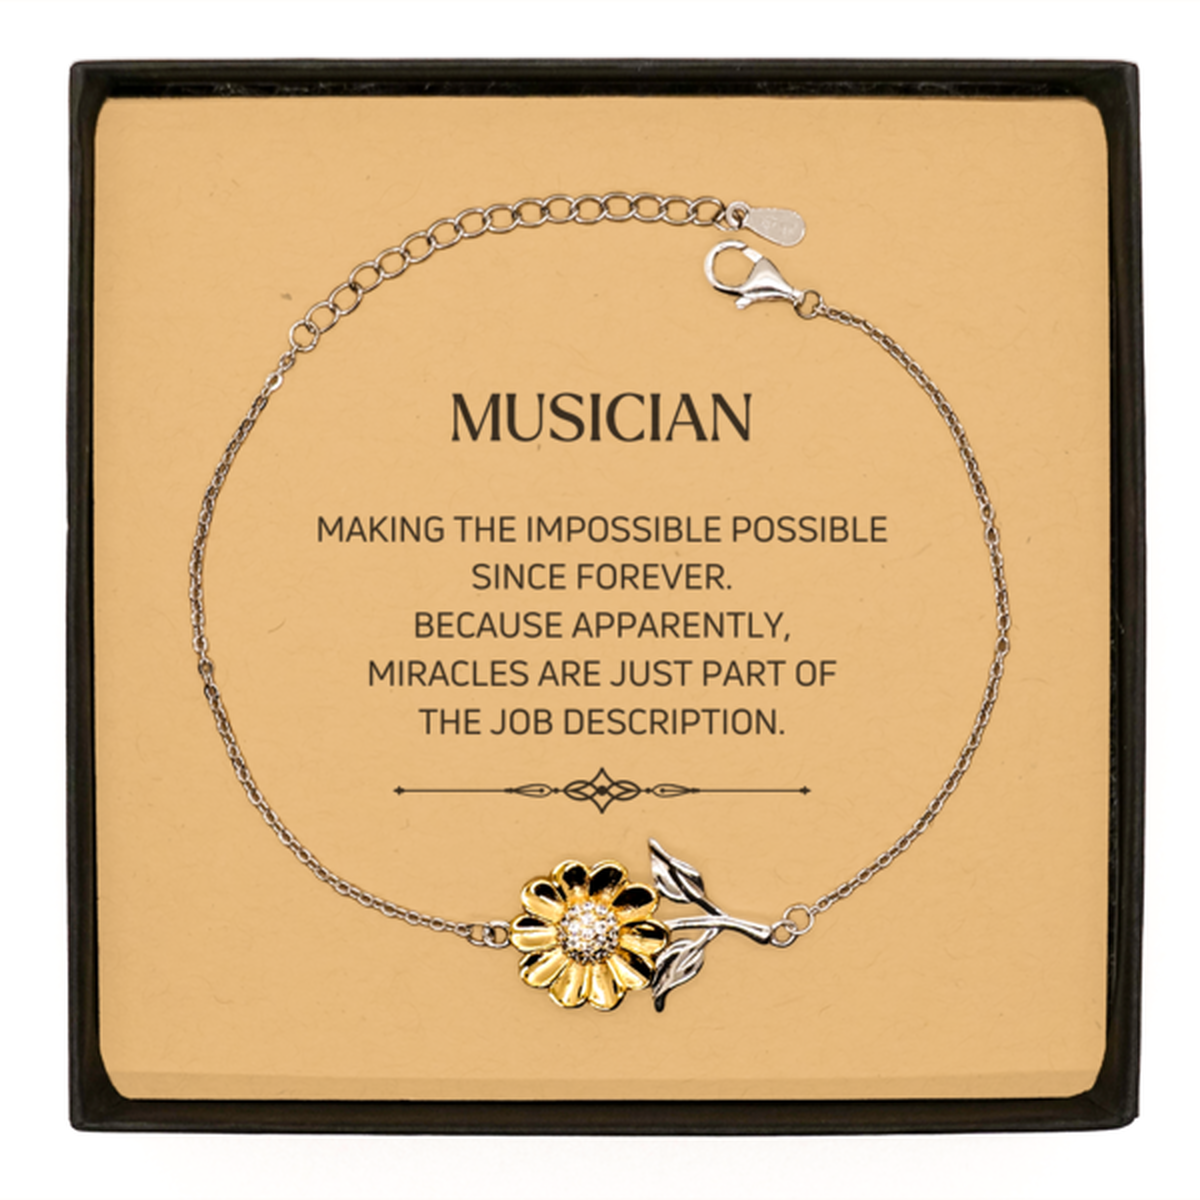 Funny Musician Gifts, Miracles are just part of the job description, Inspirational Birthday Sunflower Bracelet For Musician, Men, Women, Coworkers, Friends, Boss